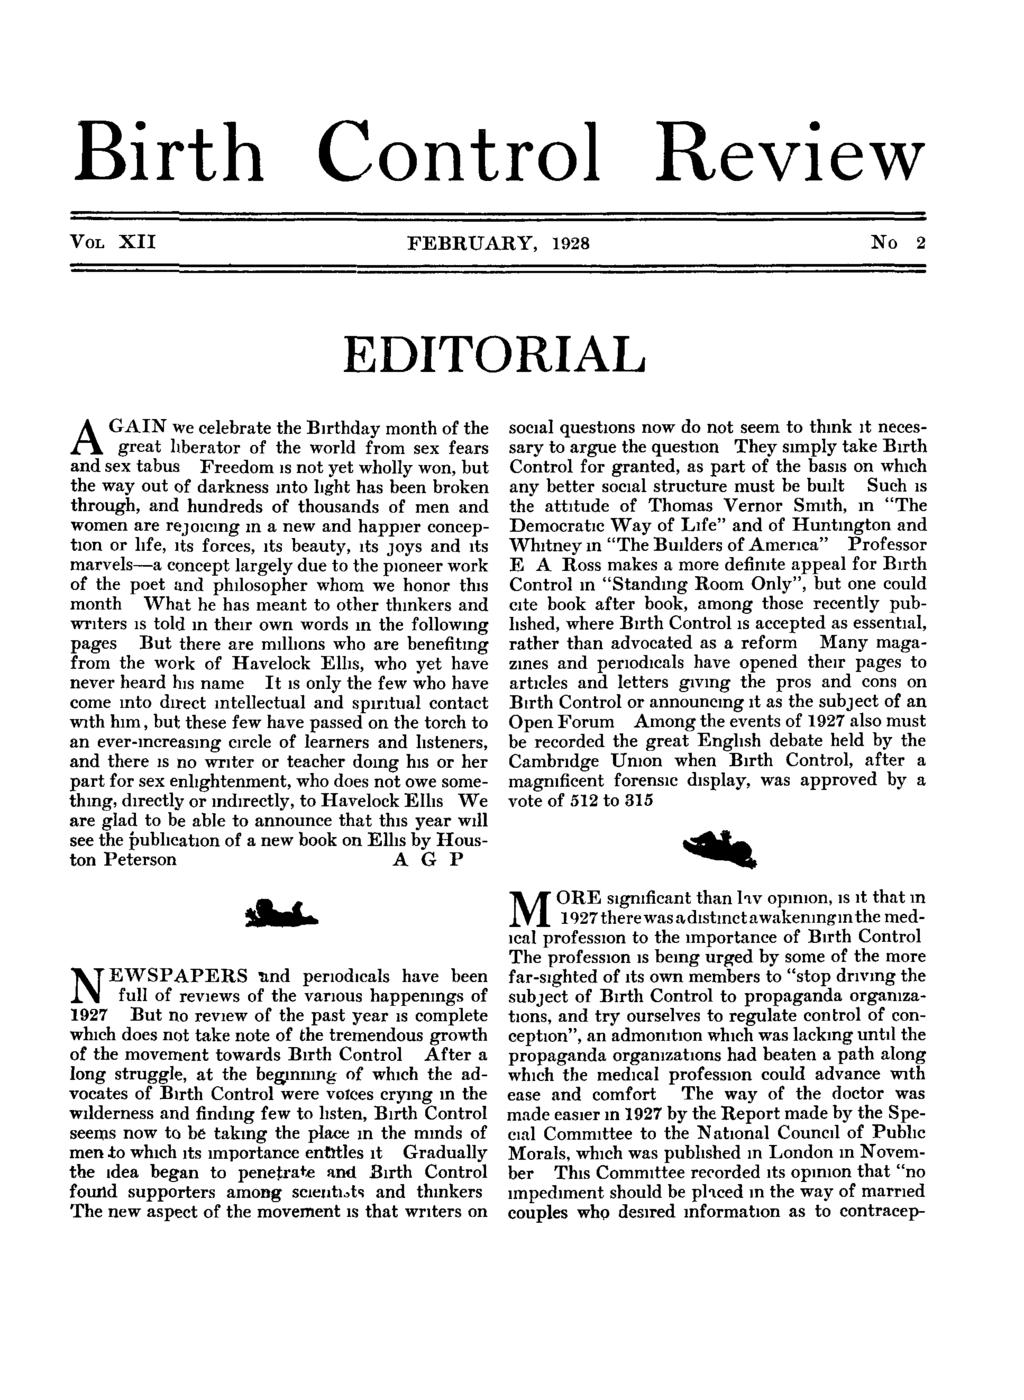 Birth Control Review VOL XI1 FEBRUARY, 1928 No 2 A EDITORIAL GAIN we celebrate the B~rthday month of the soc~al questions now do not seem to thlnk ~t necesgreat liberator of the world from sex fears